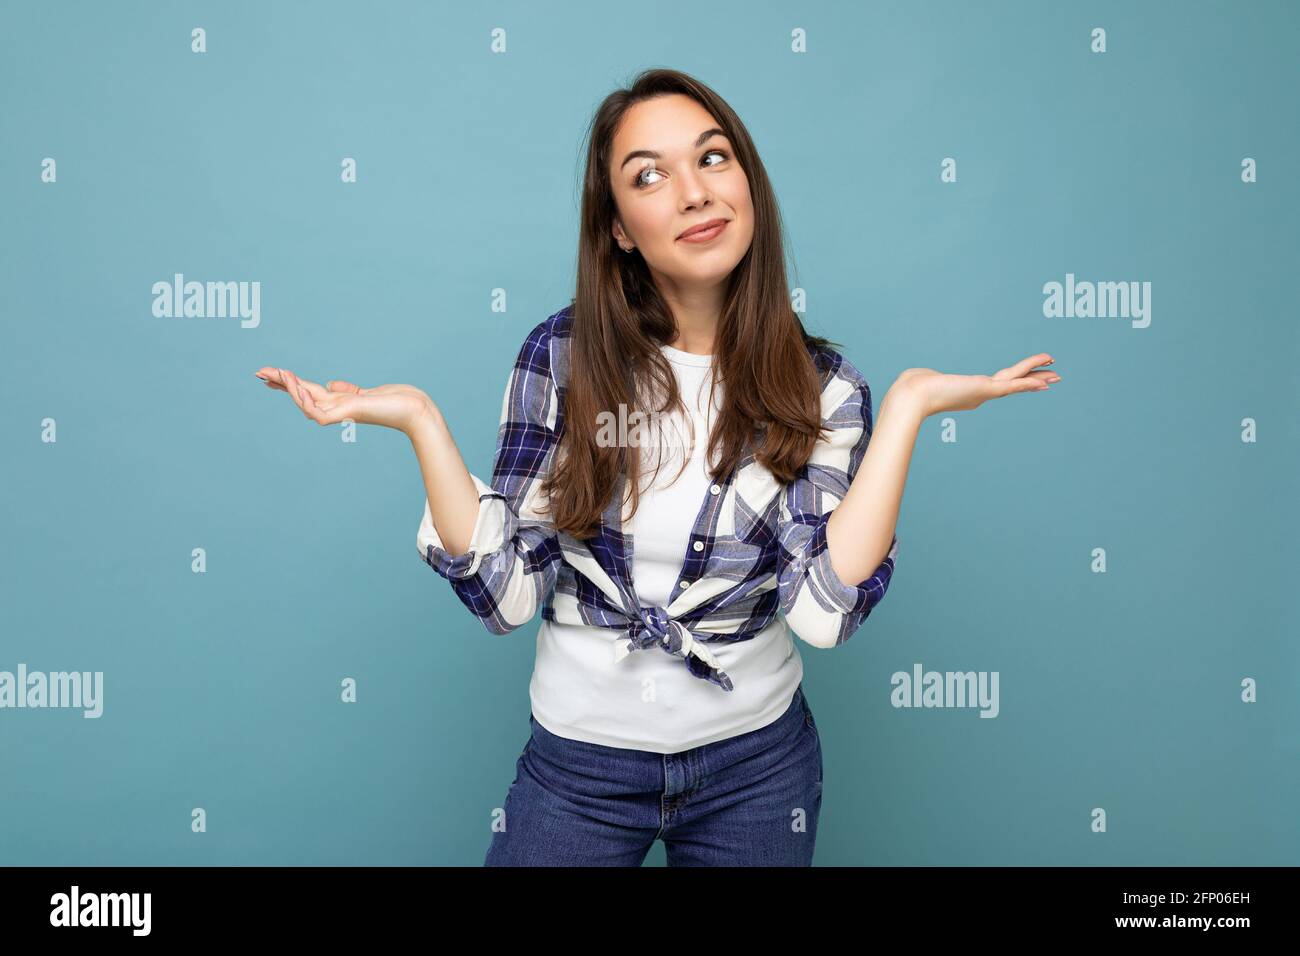 Photo of young positive happy smiling beautiful woman with sincere emotions wearing stylish clothes isolated over background with copy space and Stock Photo